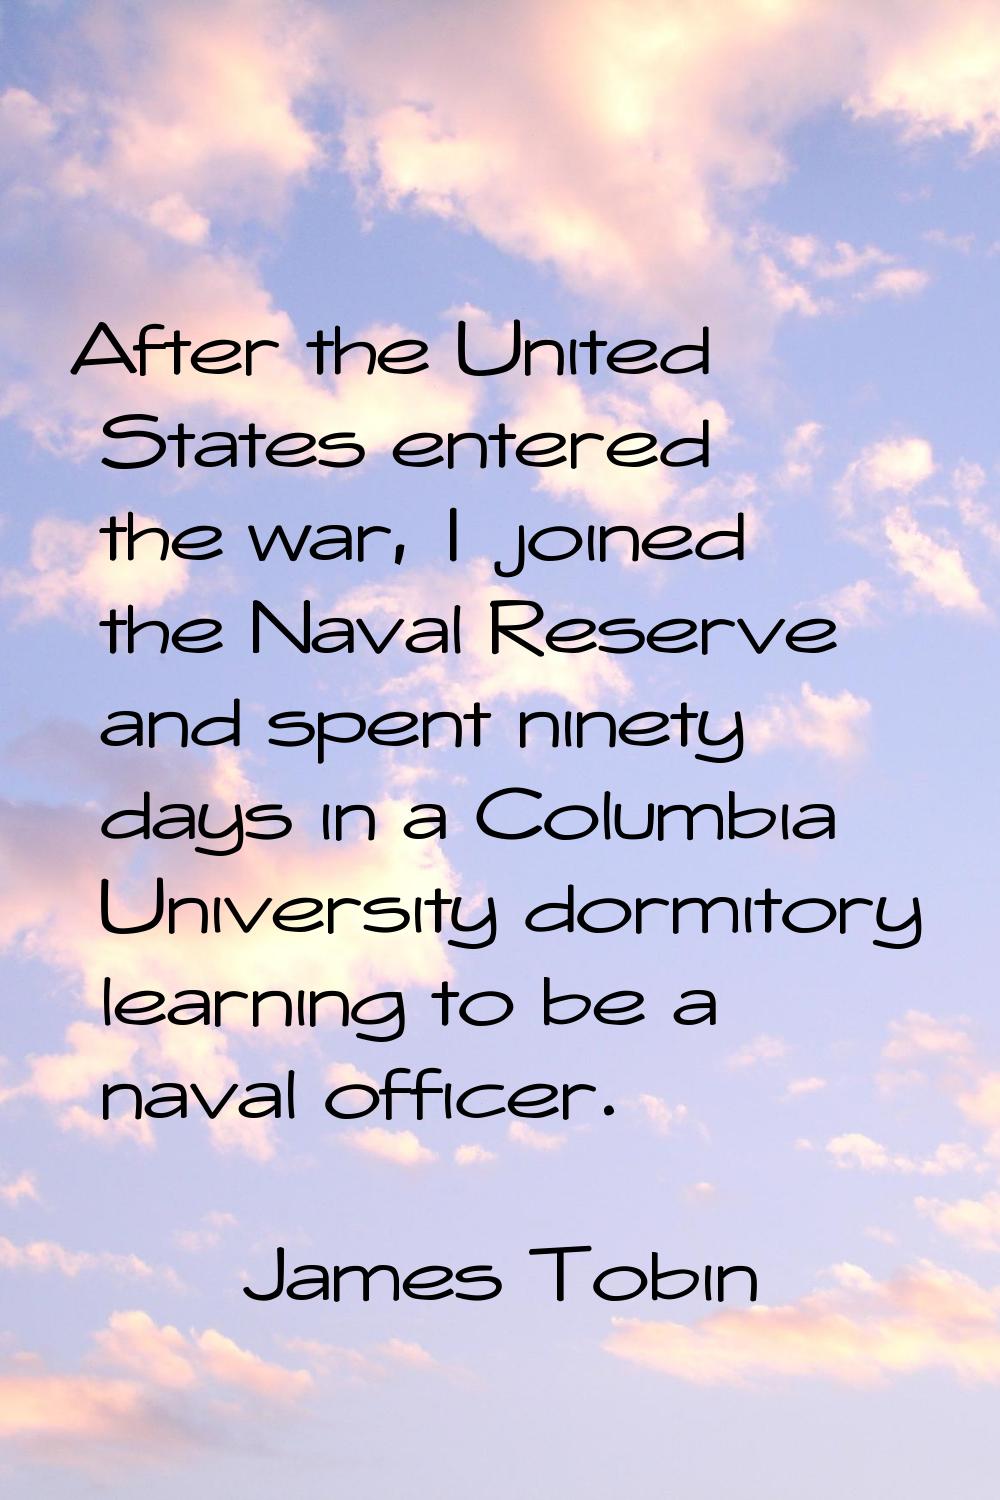 After the United States entered the war, I joined the Naval Reserve and spent ninety days in a Colu